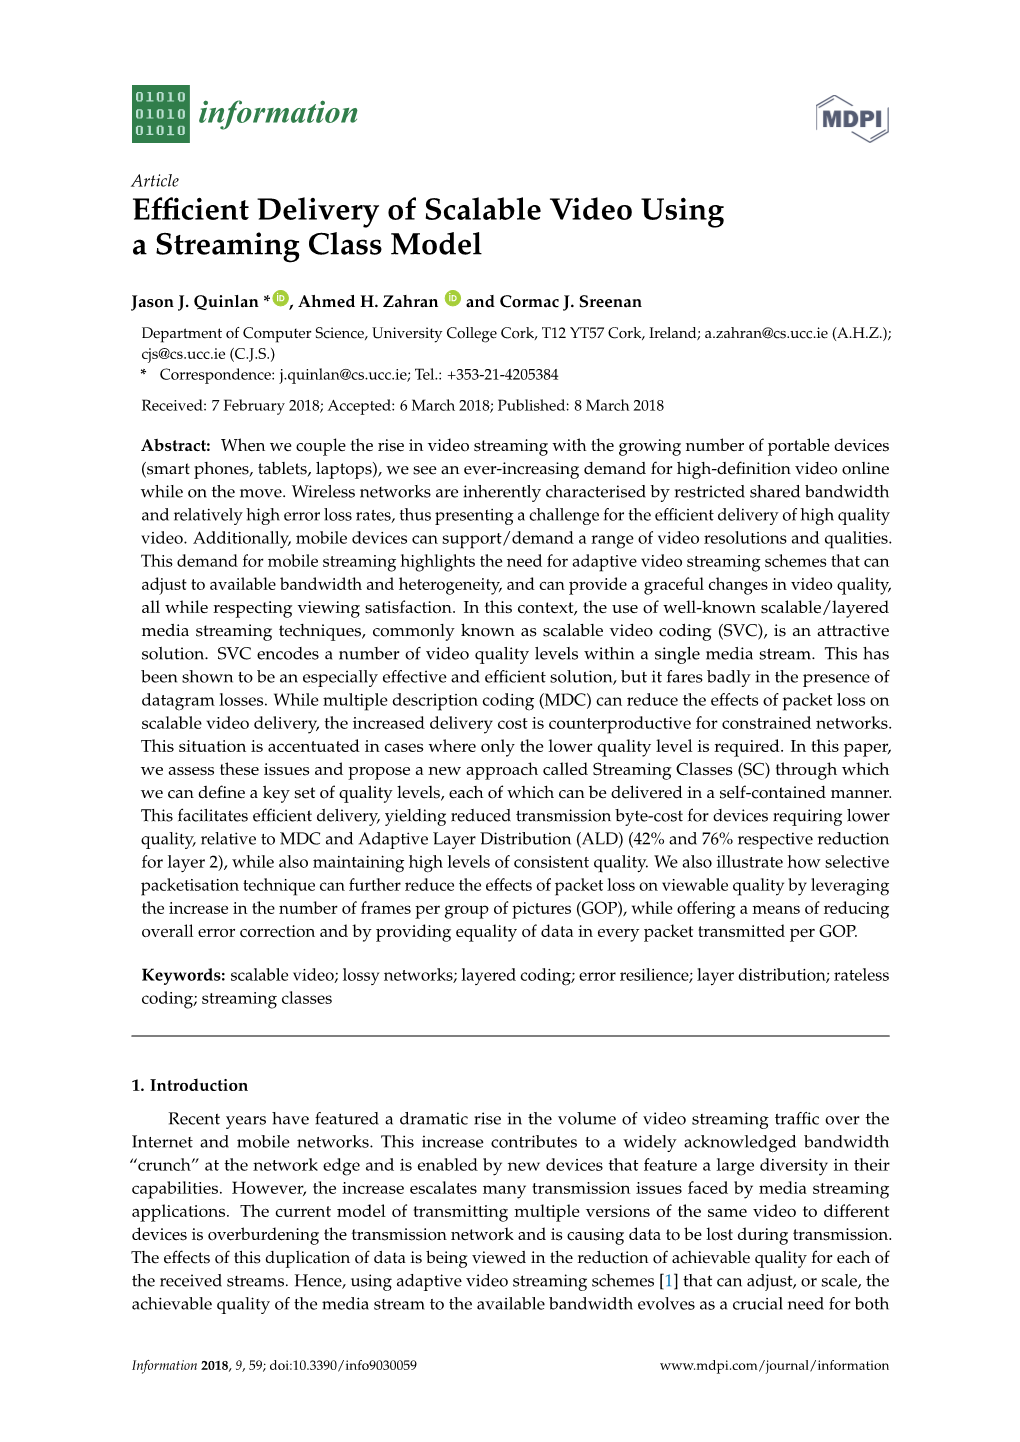 Efficient Delivery of Scalable Video Using a Streaming Class Model